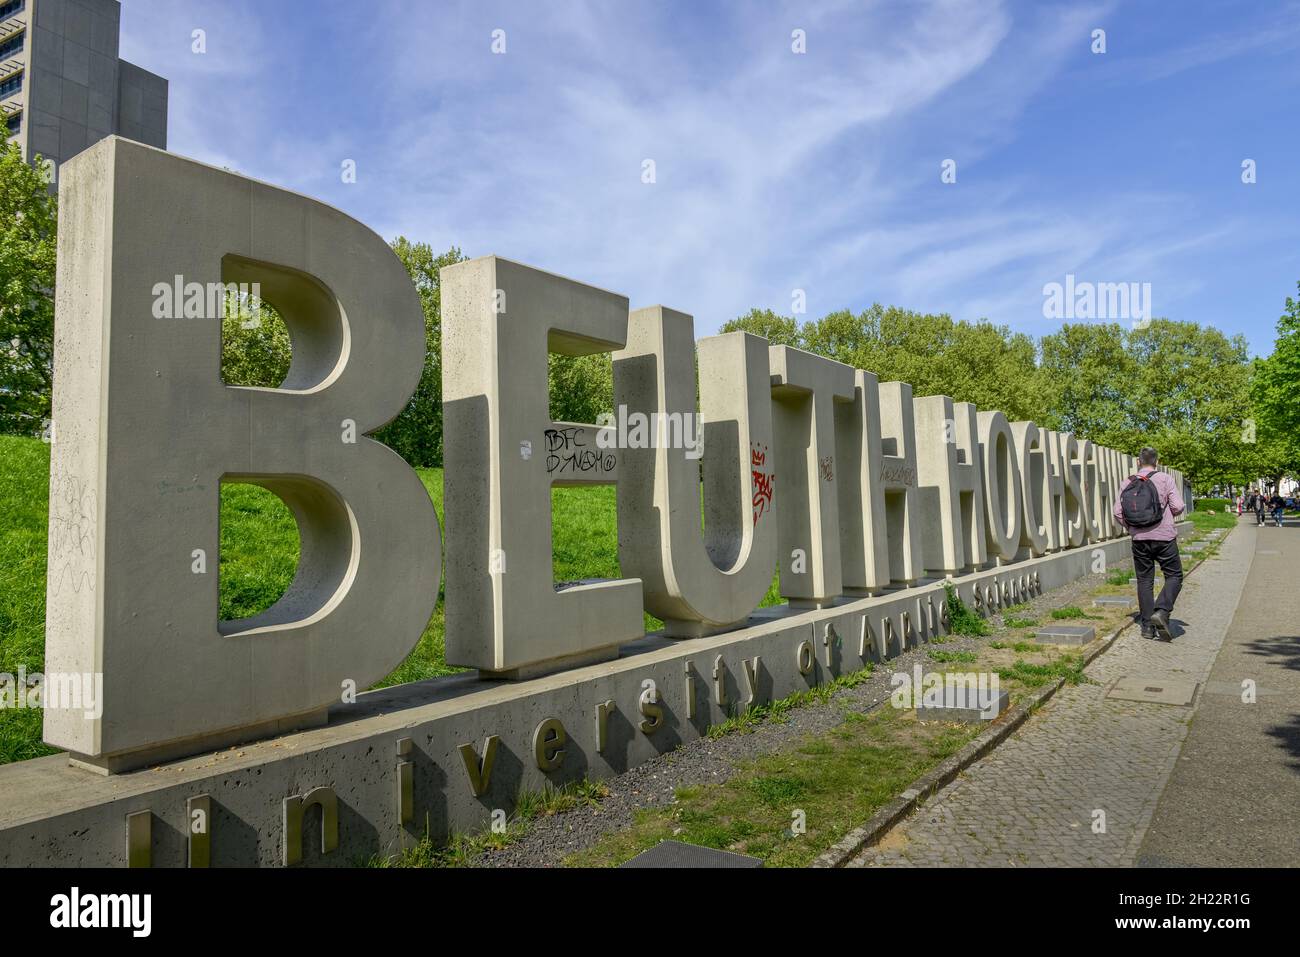 Beuth University High Resolution Stock Photography and Images - Alamy